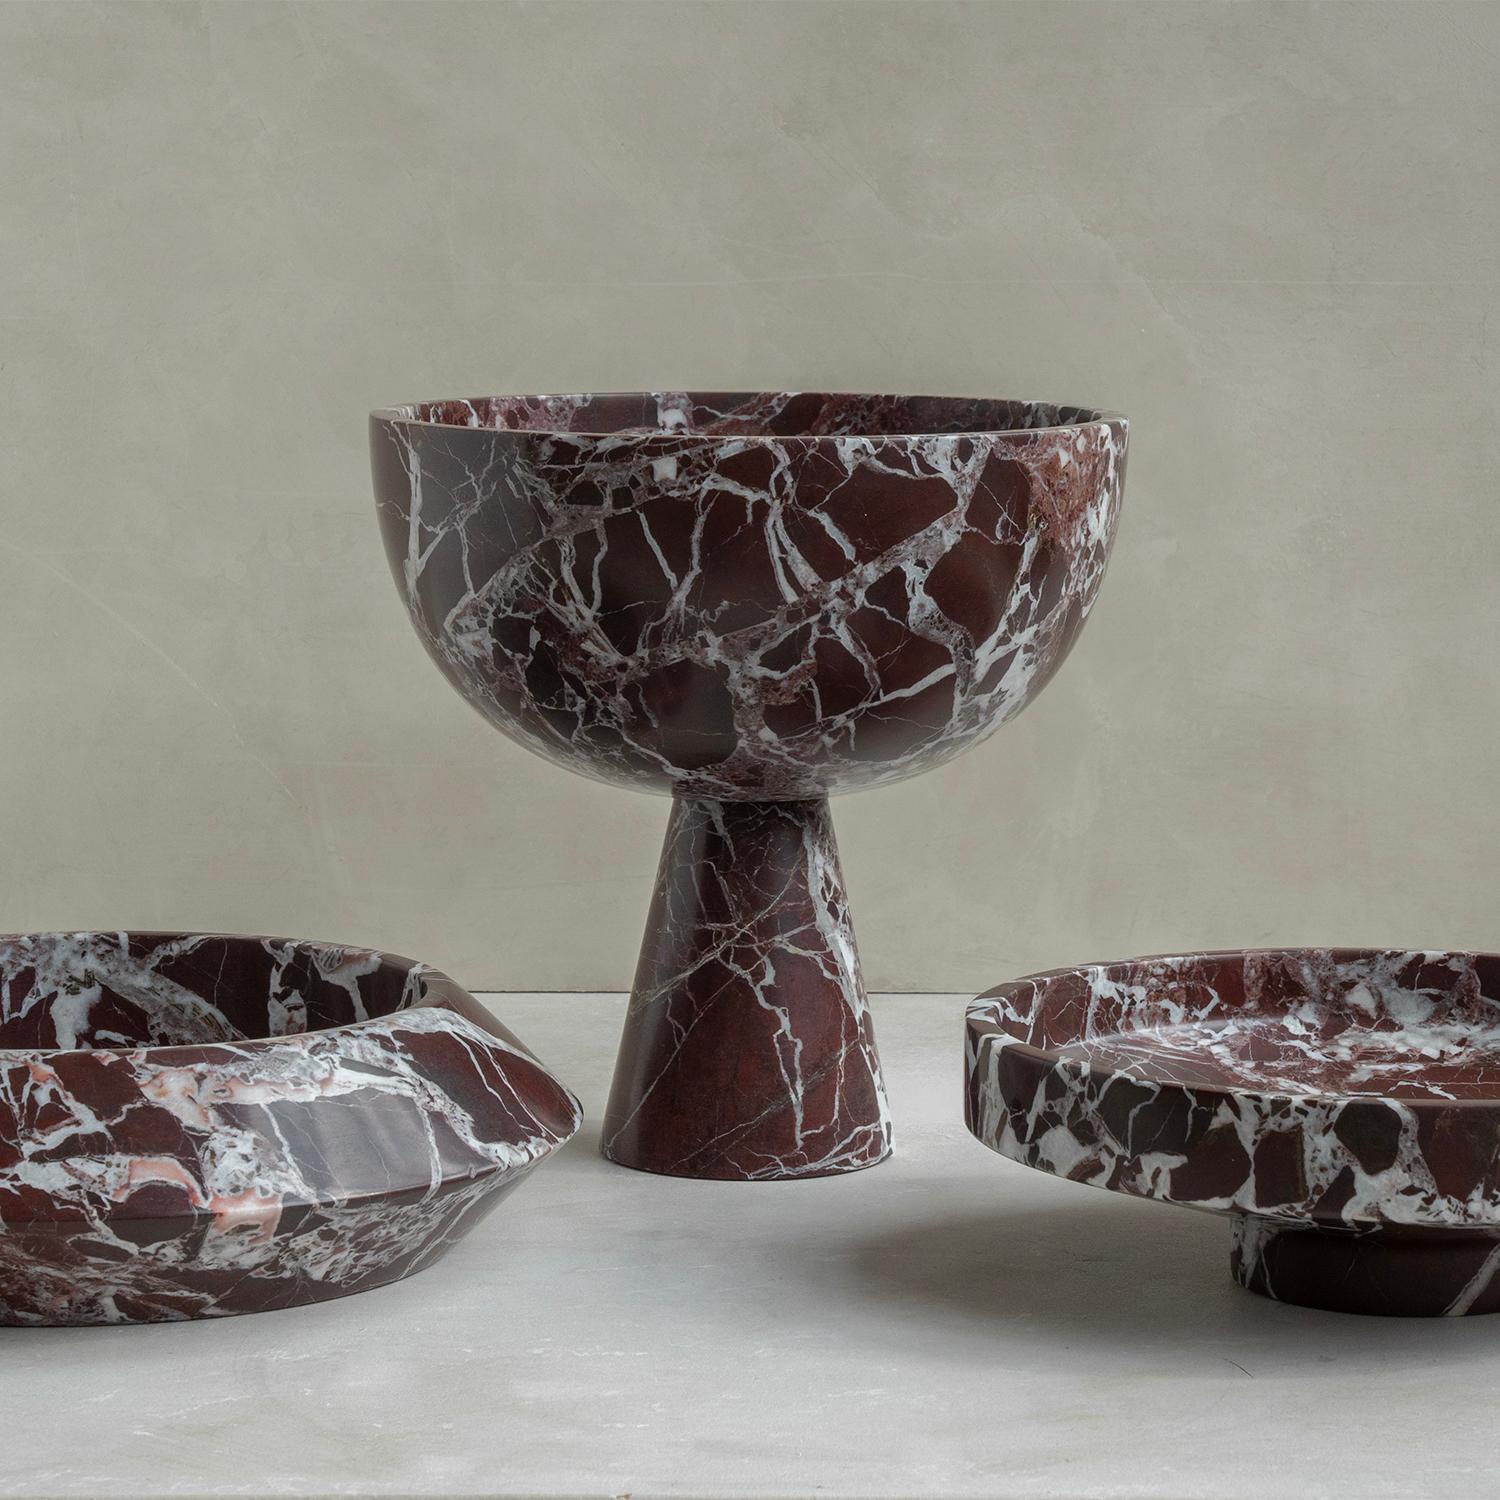 Introducing our Rosso Levanto Marble Pedestal Bowl, a fusion of style and functionality. Handcrafted with precision from premium Rosso Levanto marble, this stunning bowl with its pedestal base adds a touch of refinement to any space.

There may be